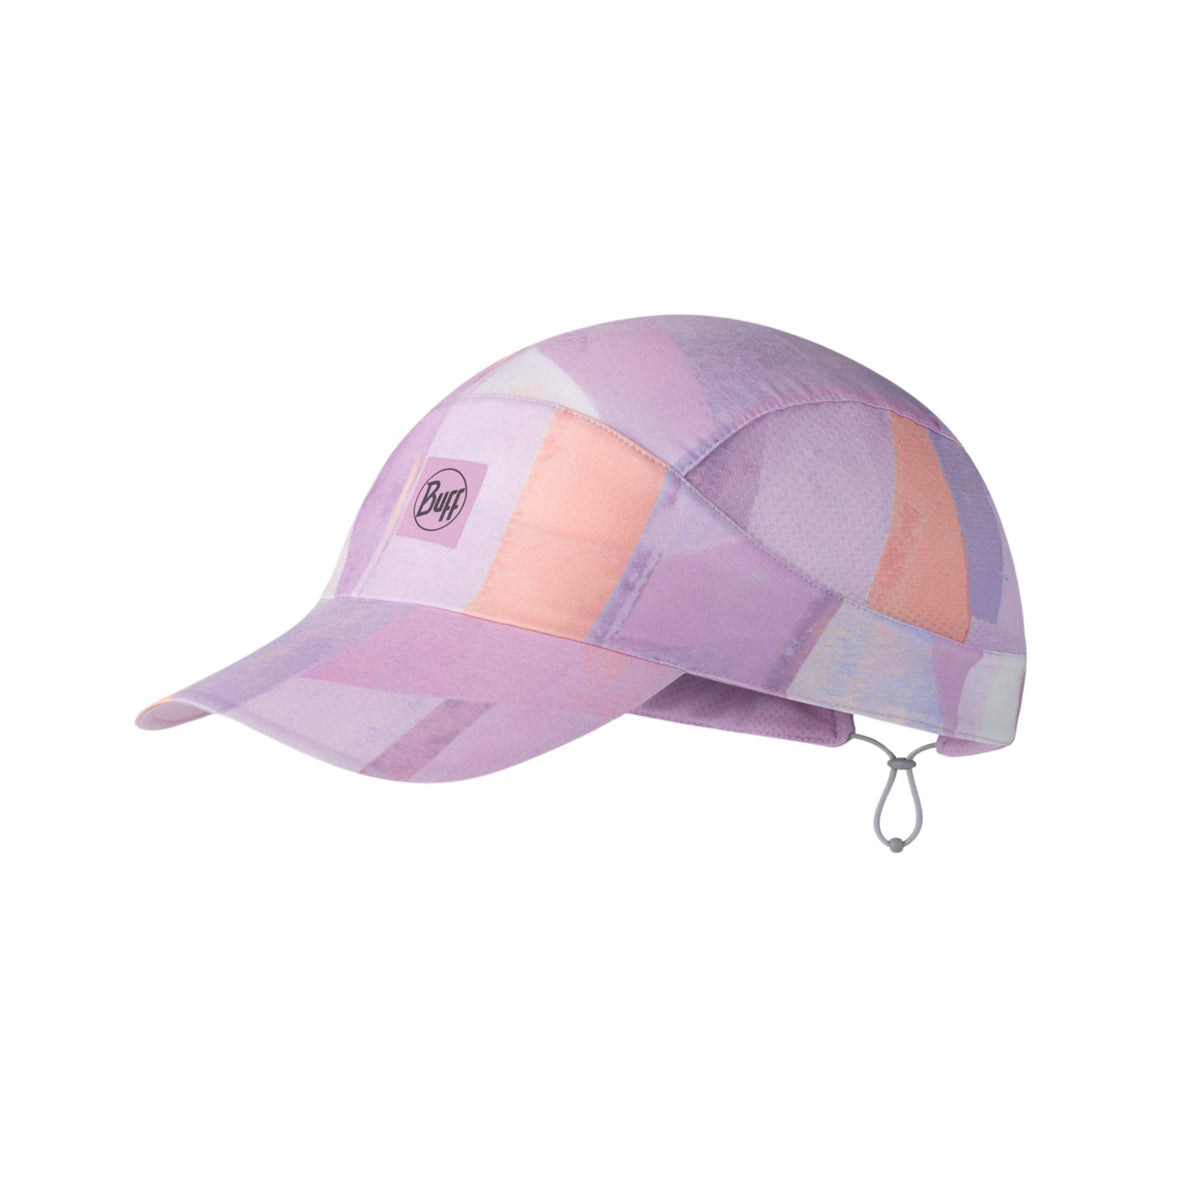 BUFF | PACK SPEED CAP - SHANE LILAC SAND - Cappello